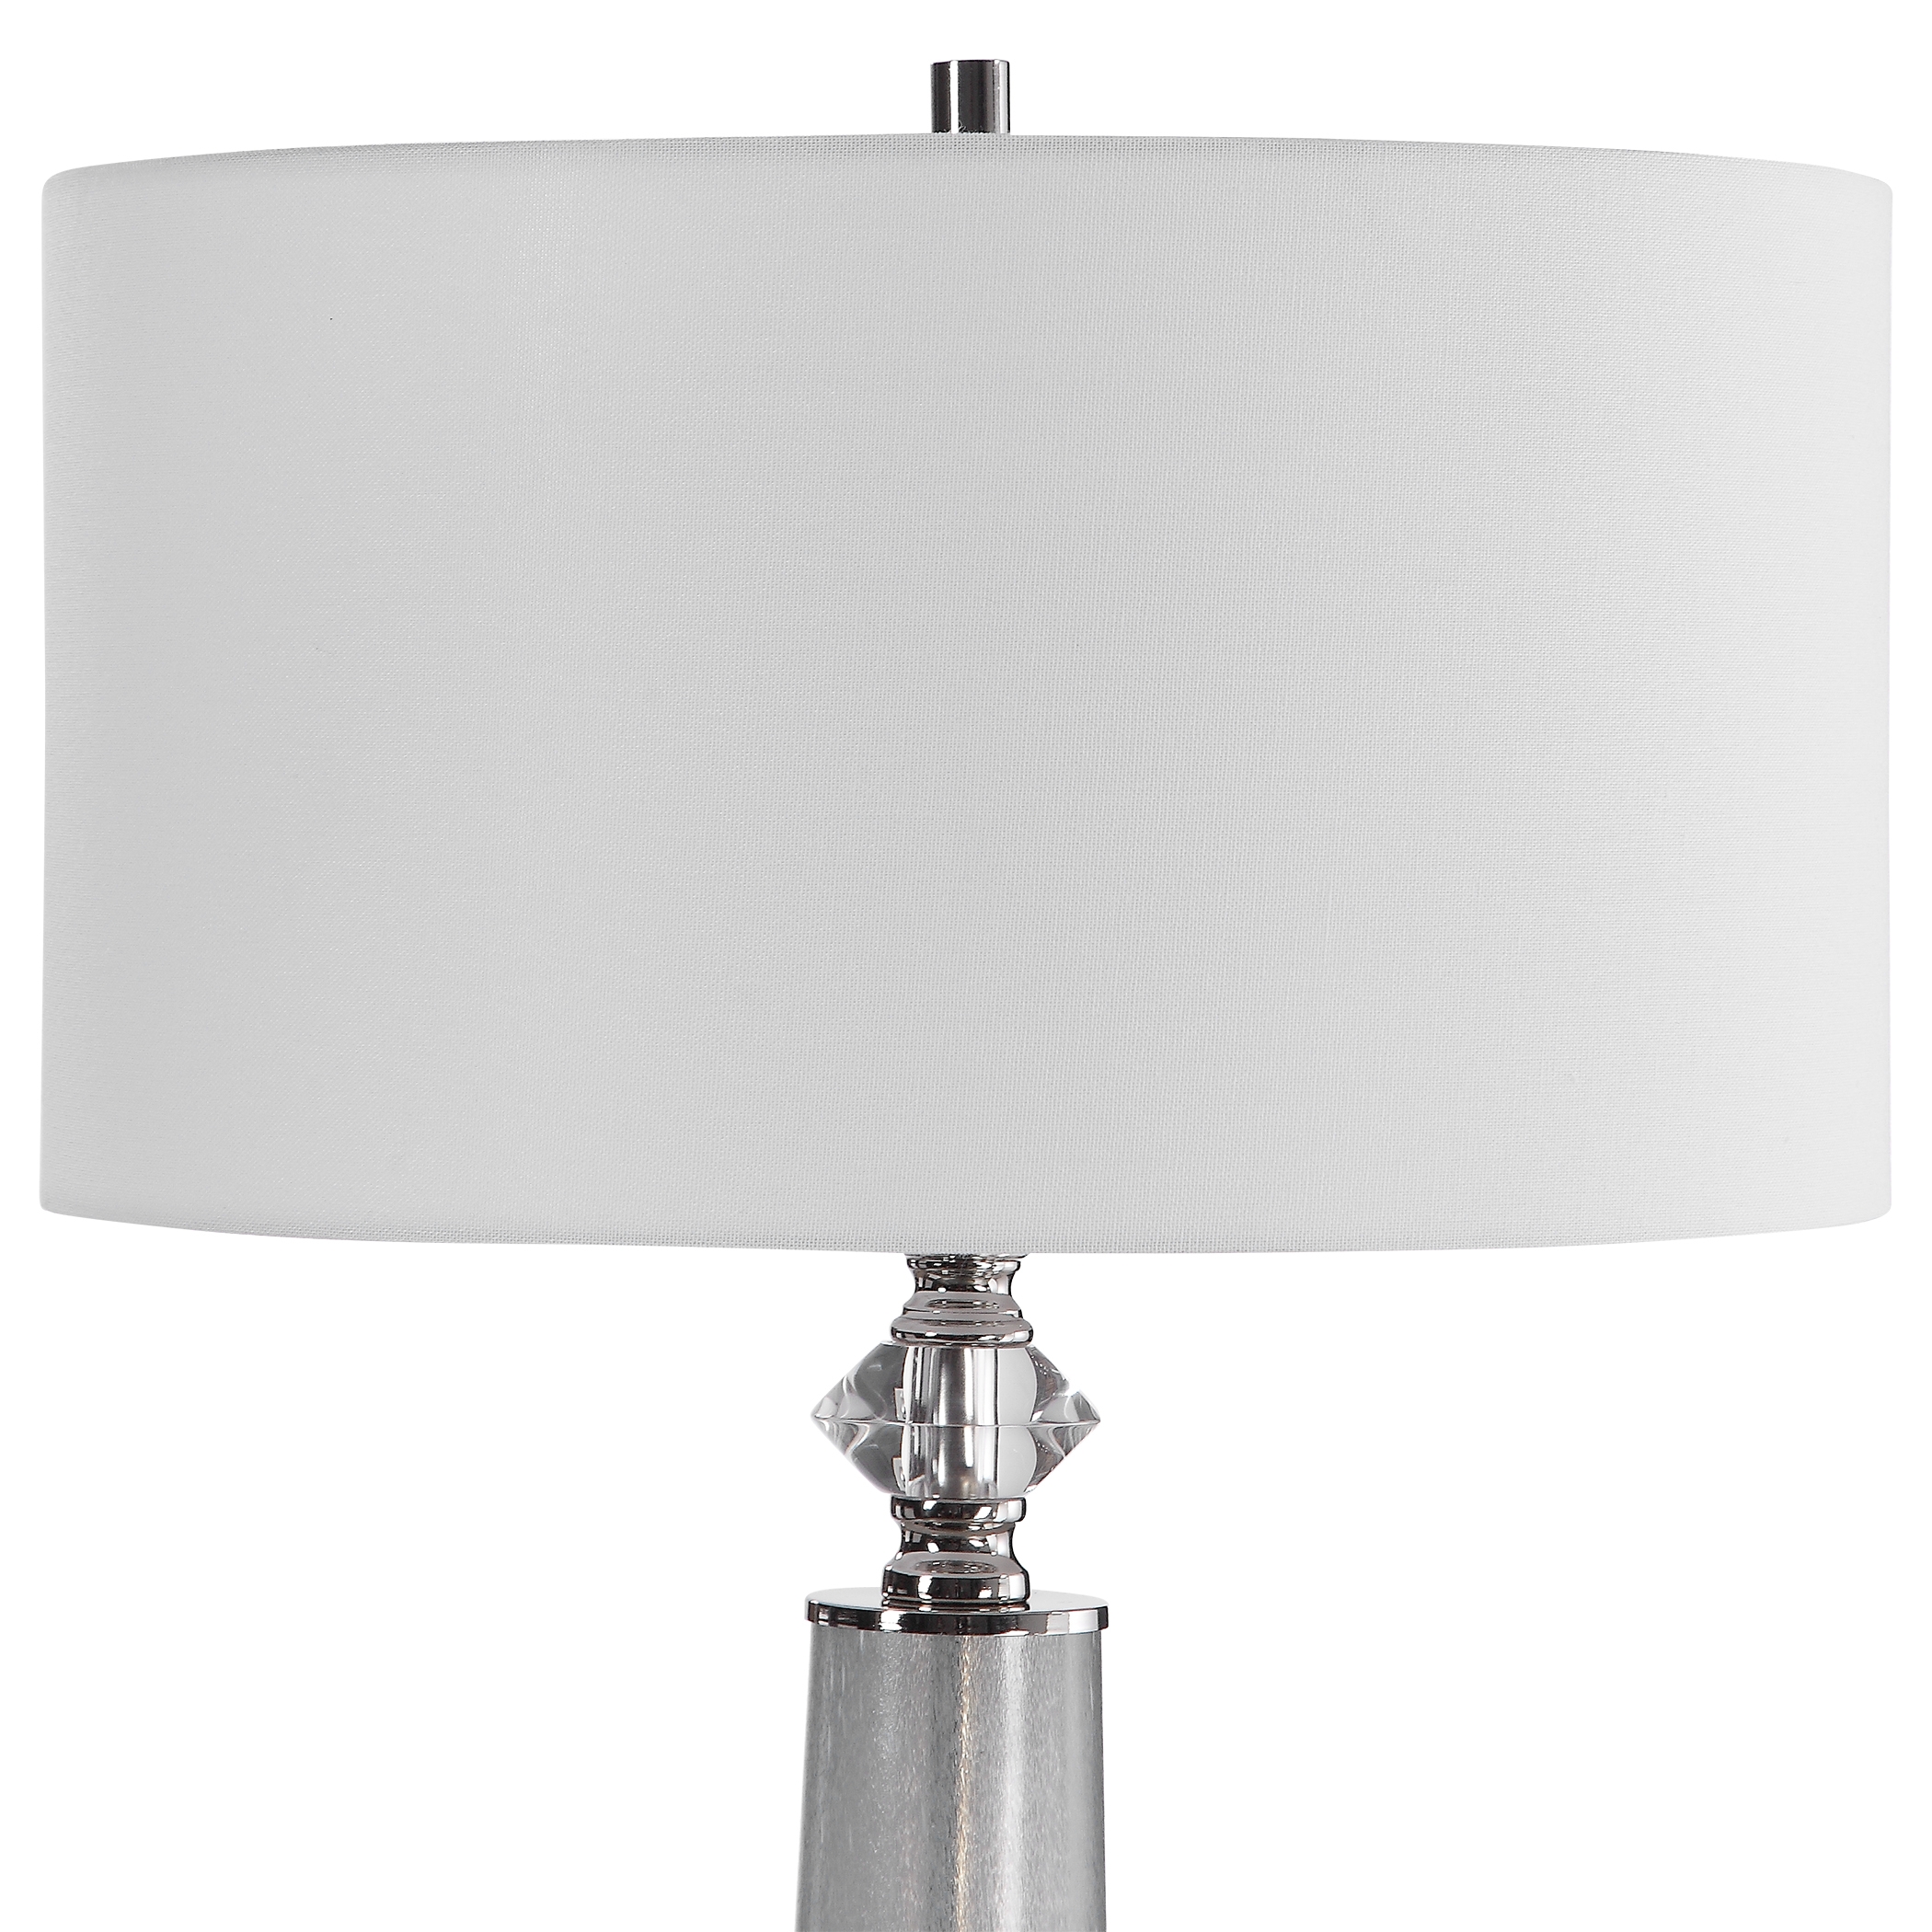 Grayton Frosted Art Table Lamp - Image 2